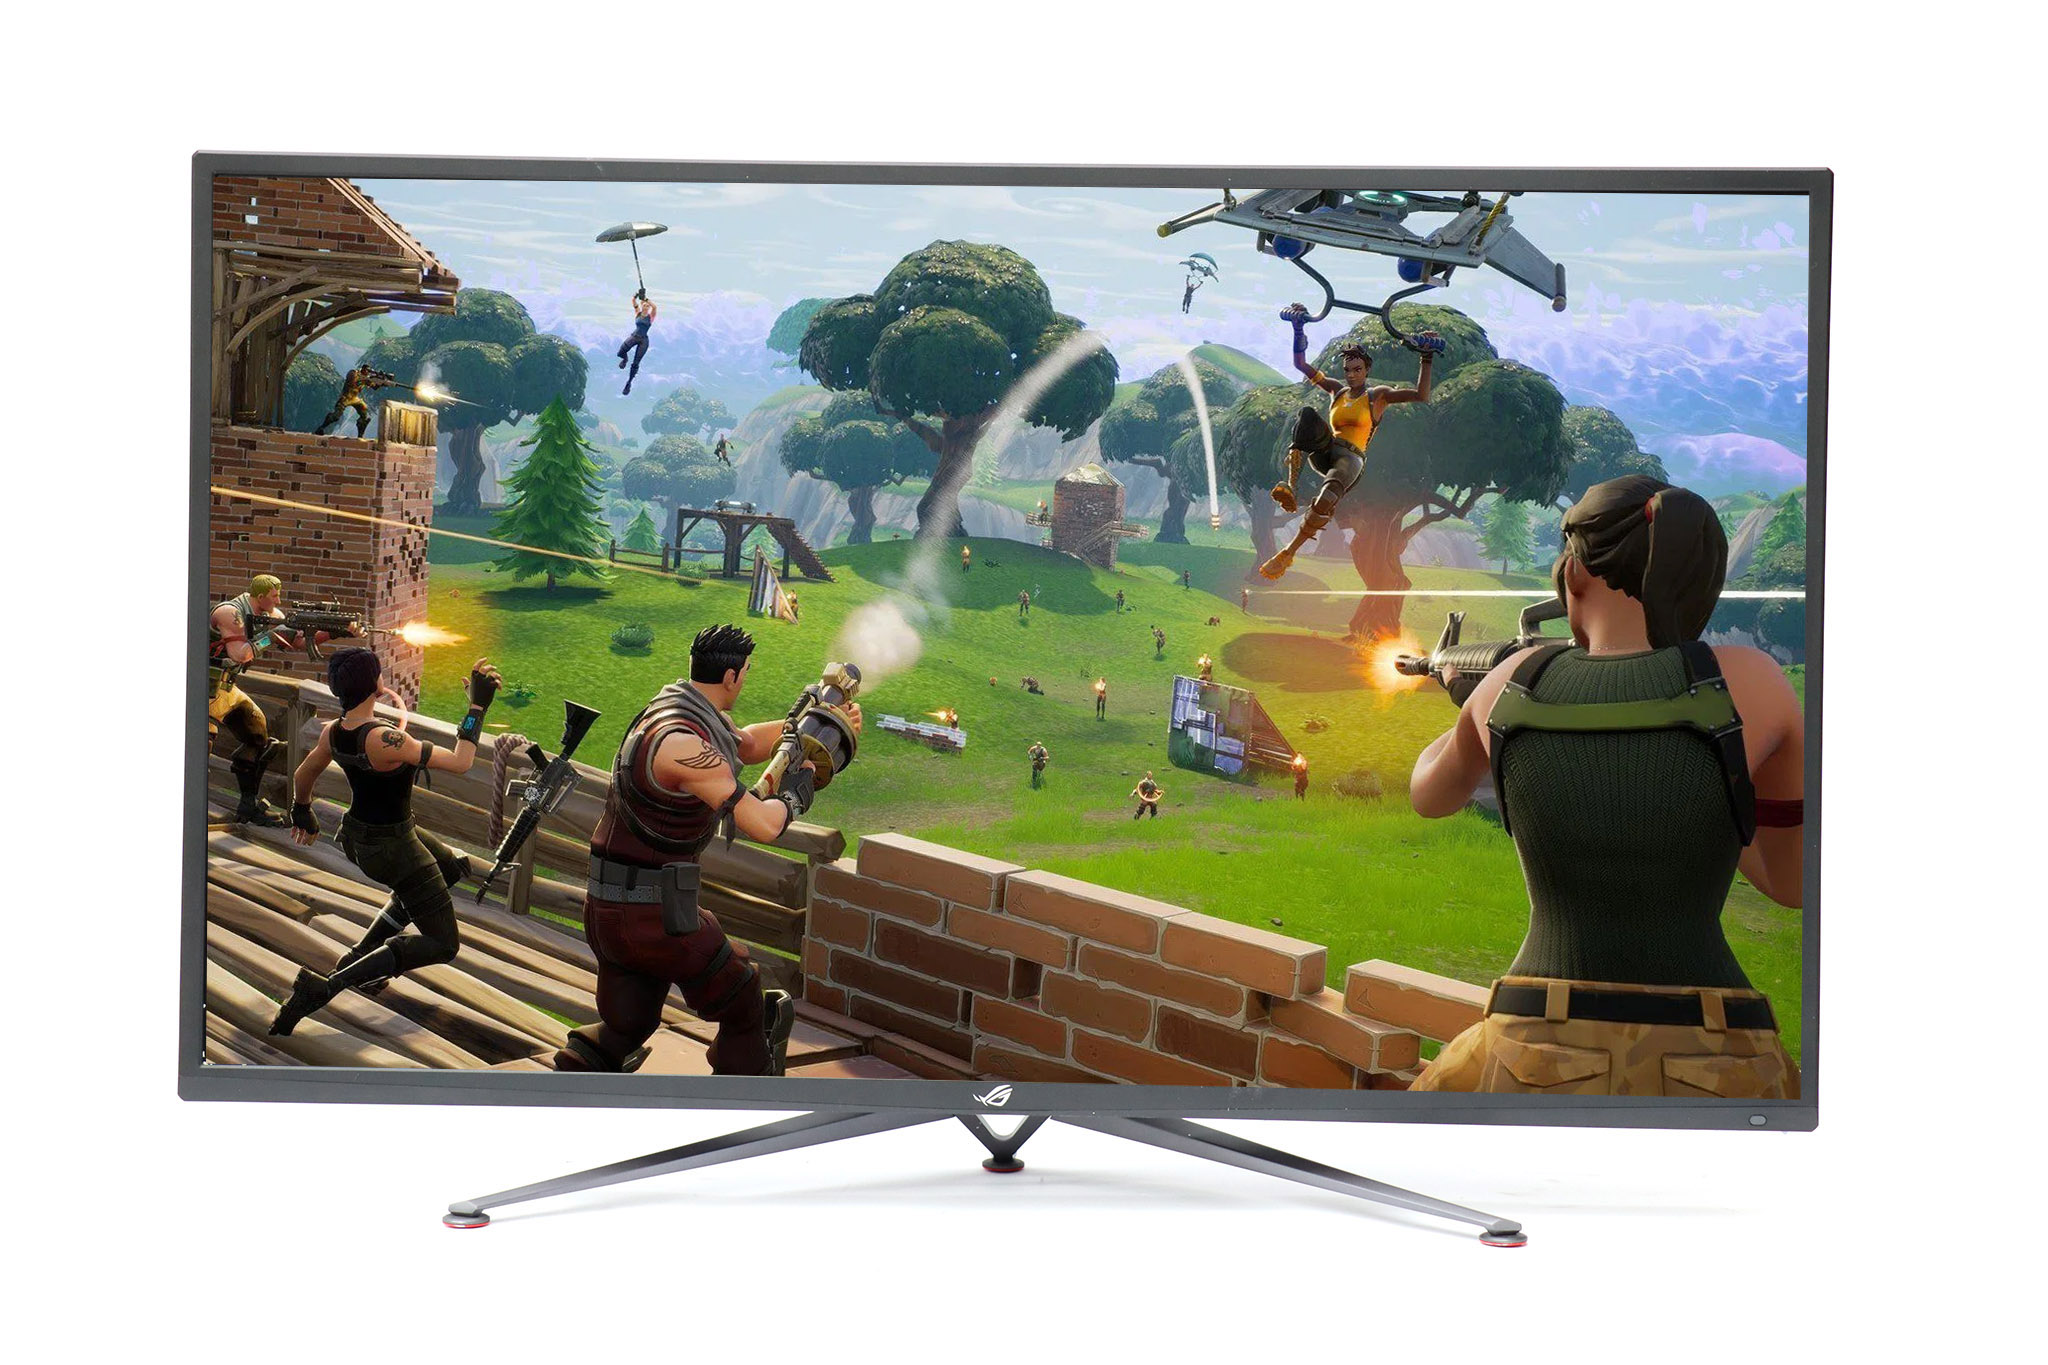 ASUS Introduces 4K 120Hz FreeSync 2 Gaming Monitor, The XG438Q